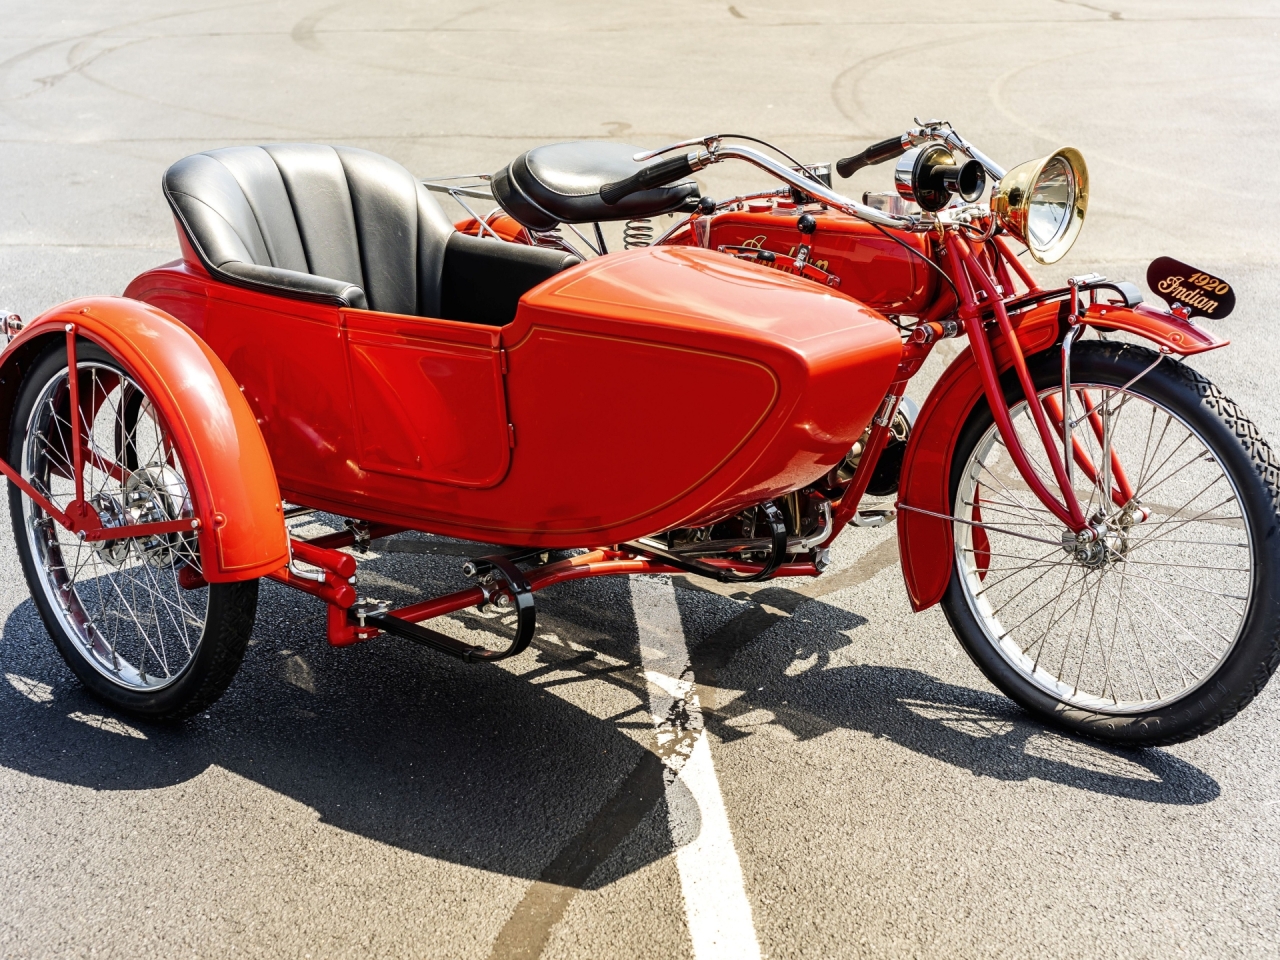 1920 Indian Power Plus Twin